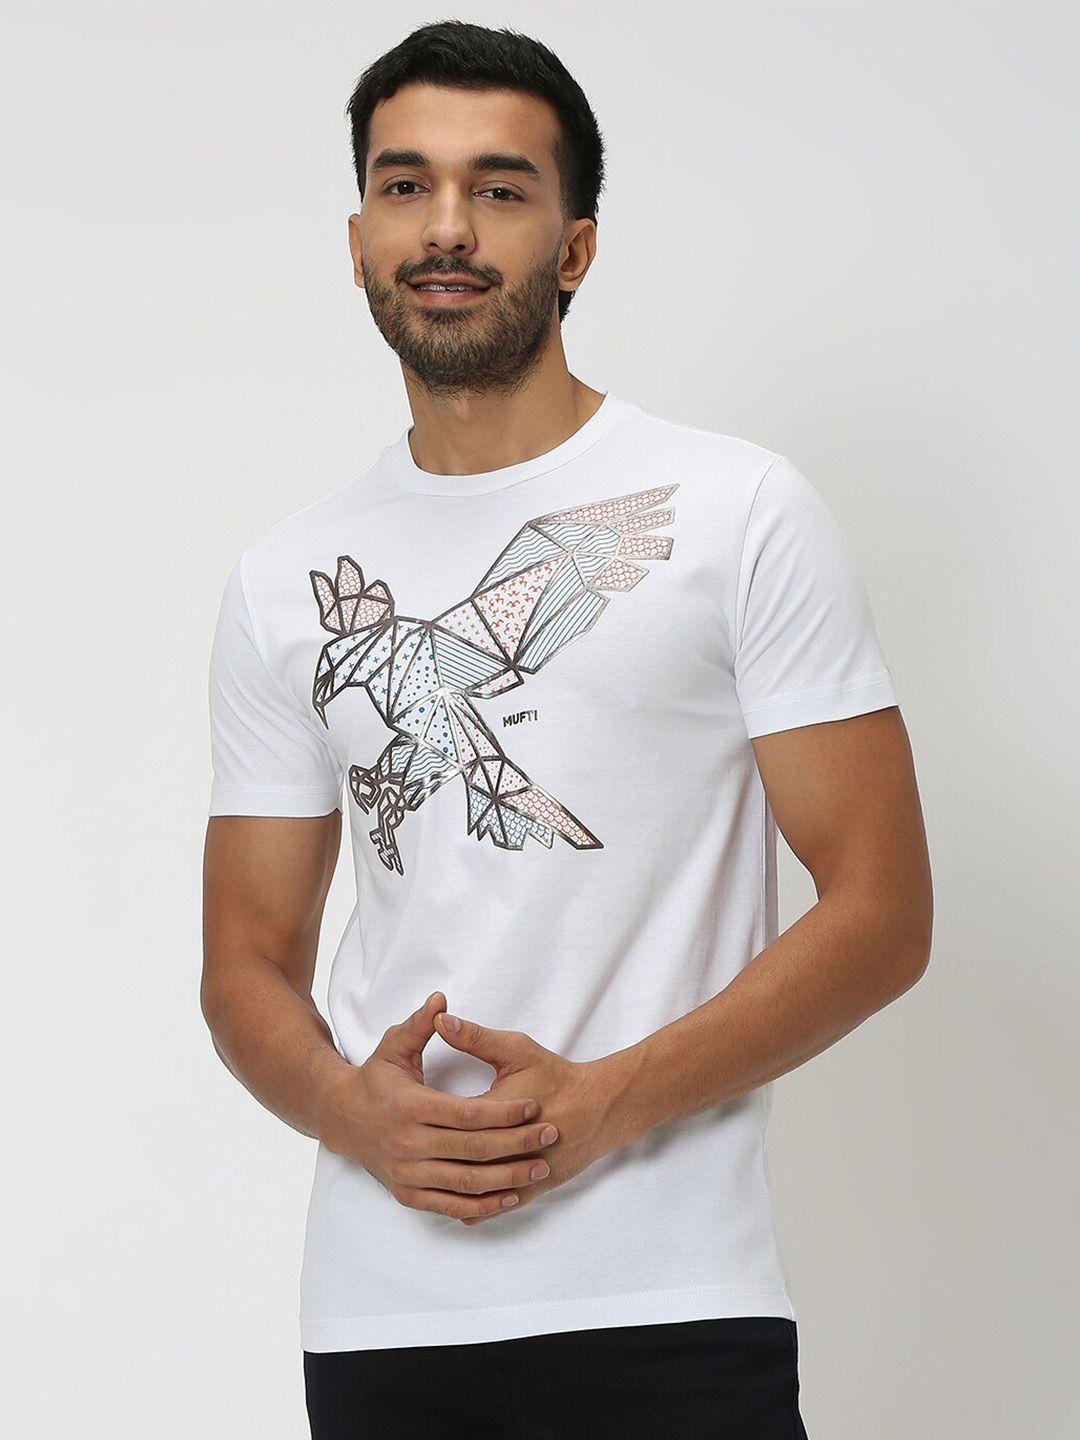 mufti graphic printed slim fit pure cotton t-shirt